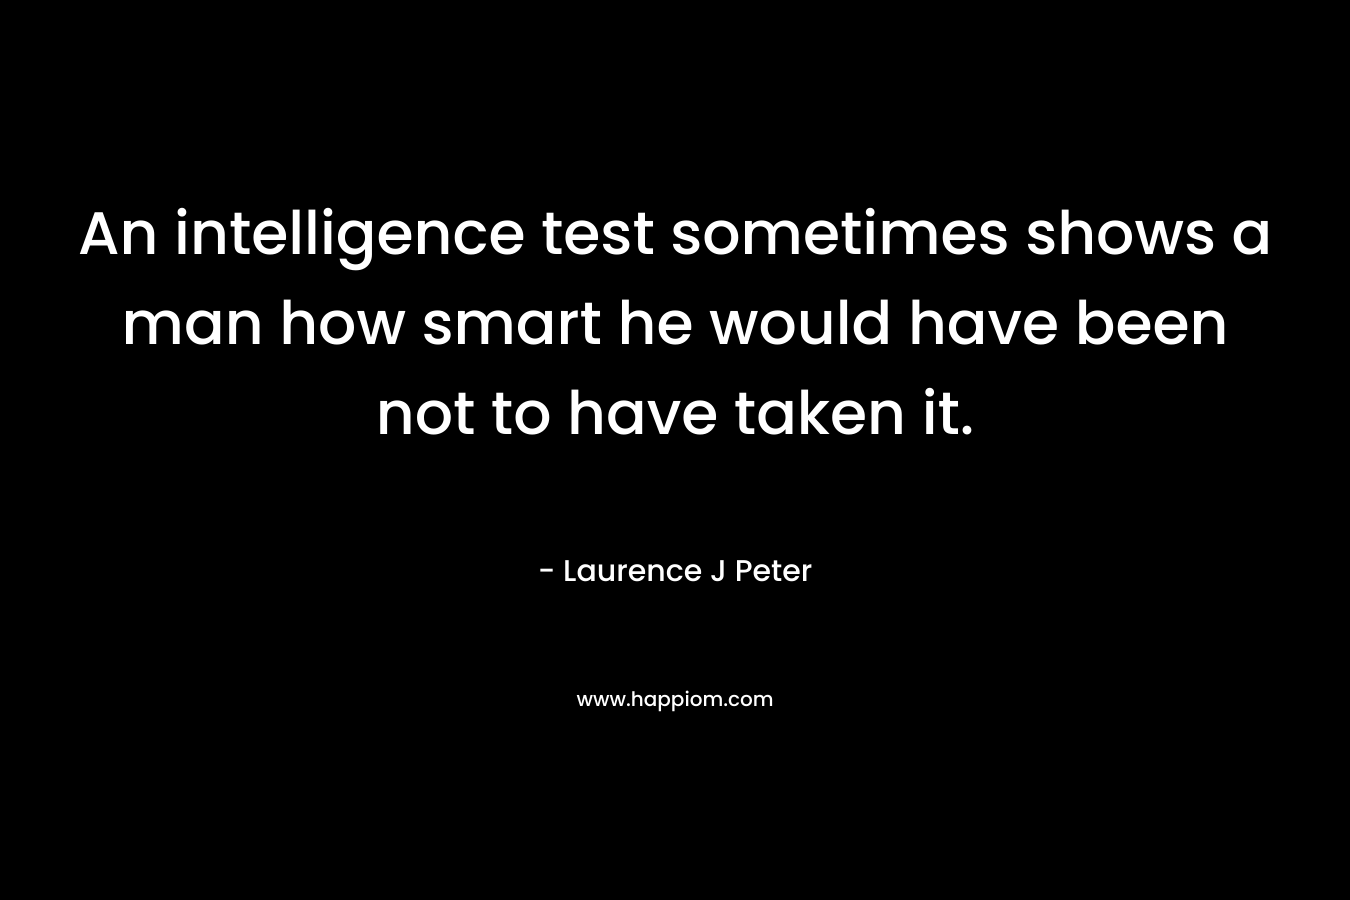 An intelligence test sometimes shows a man how smart he would have been not to have taken it. – Laurence J Peter